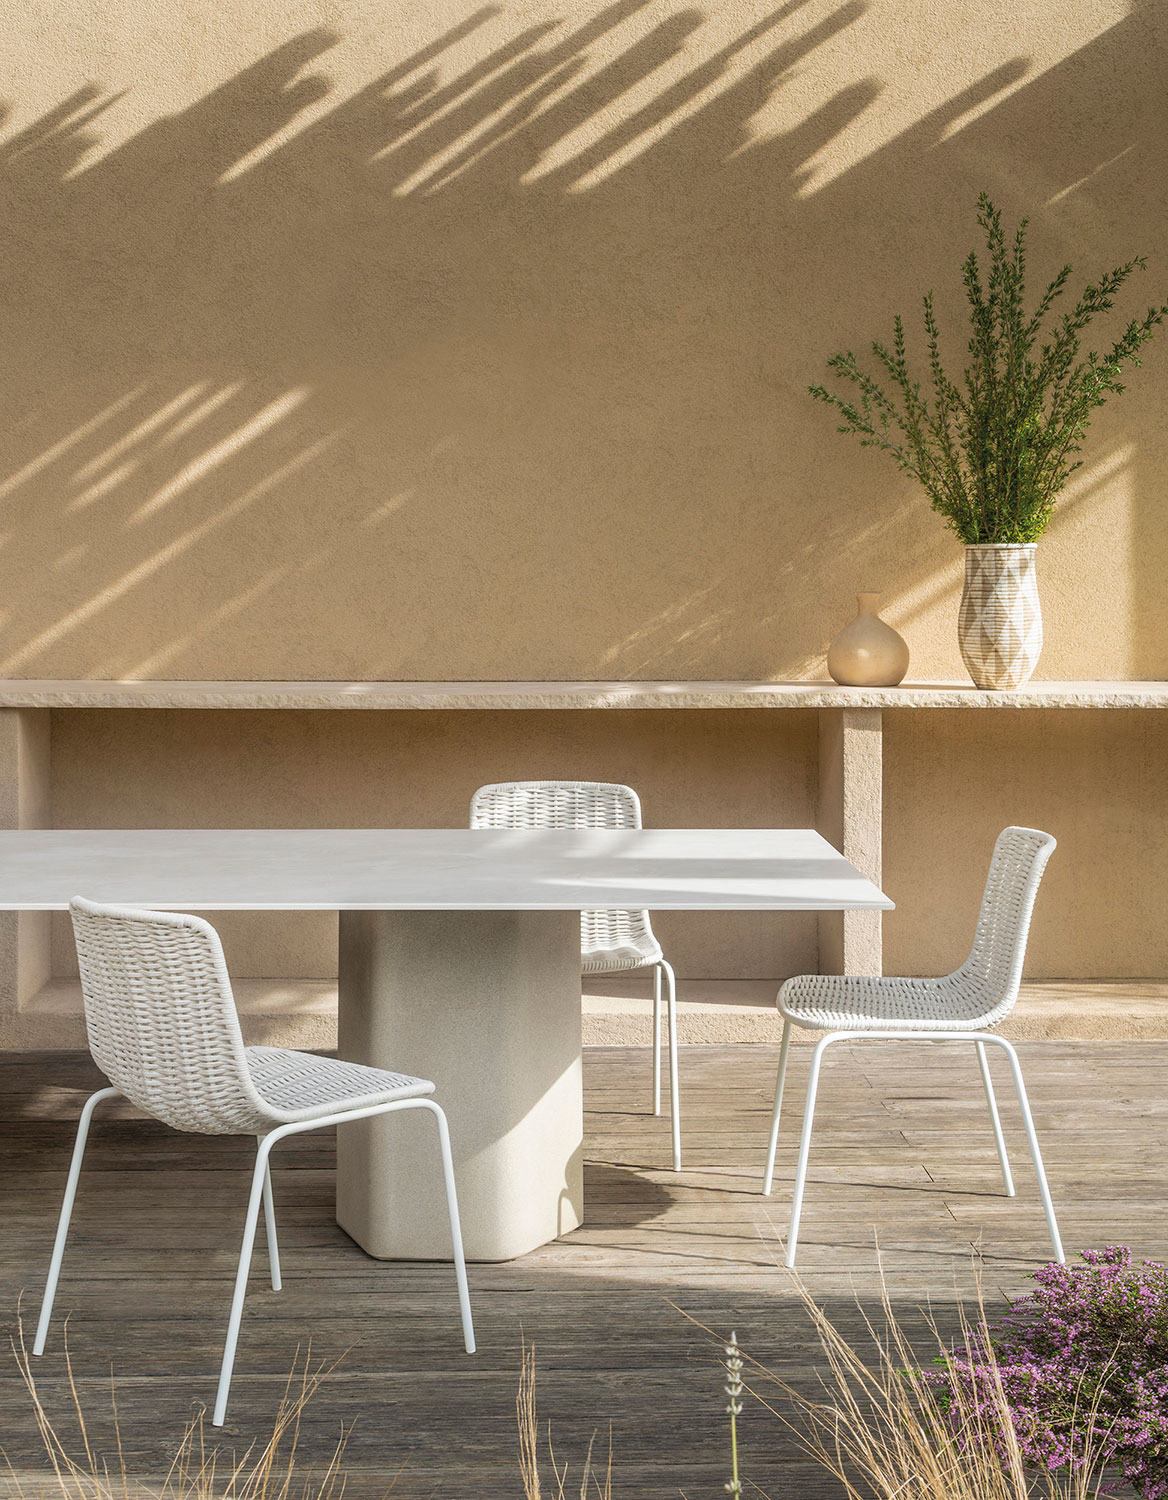 outdoor collection - talo furniture family